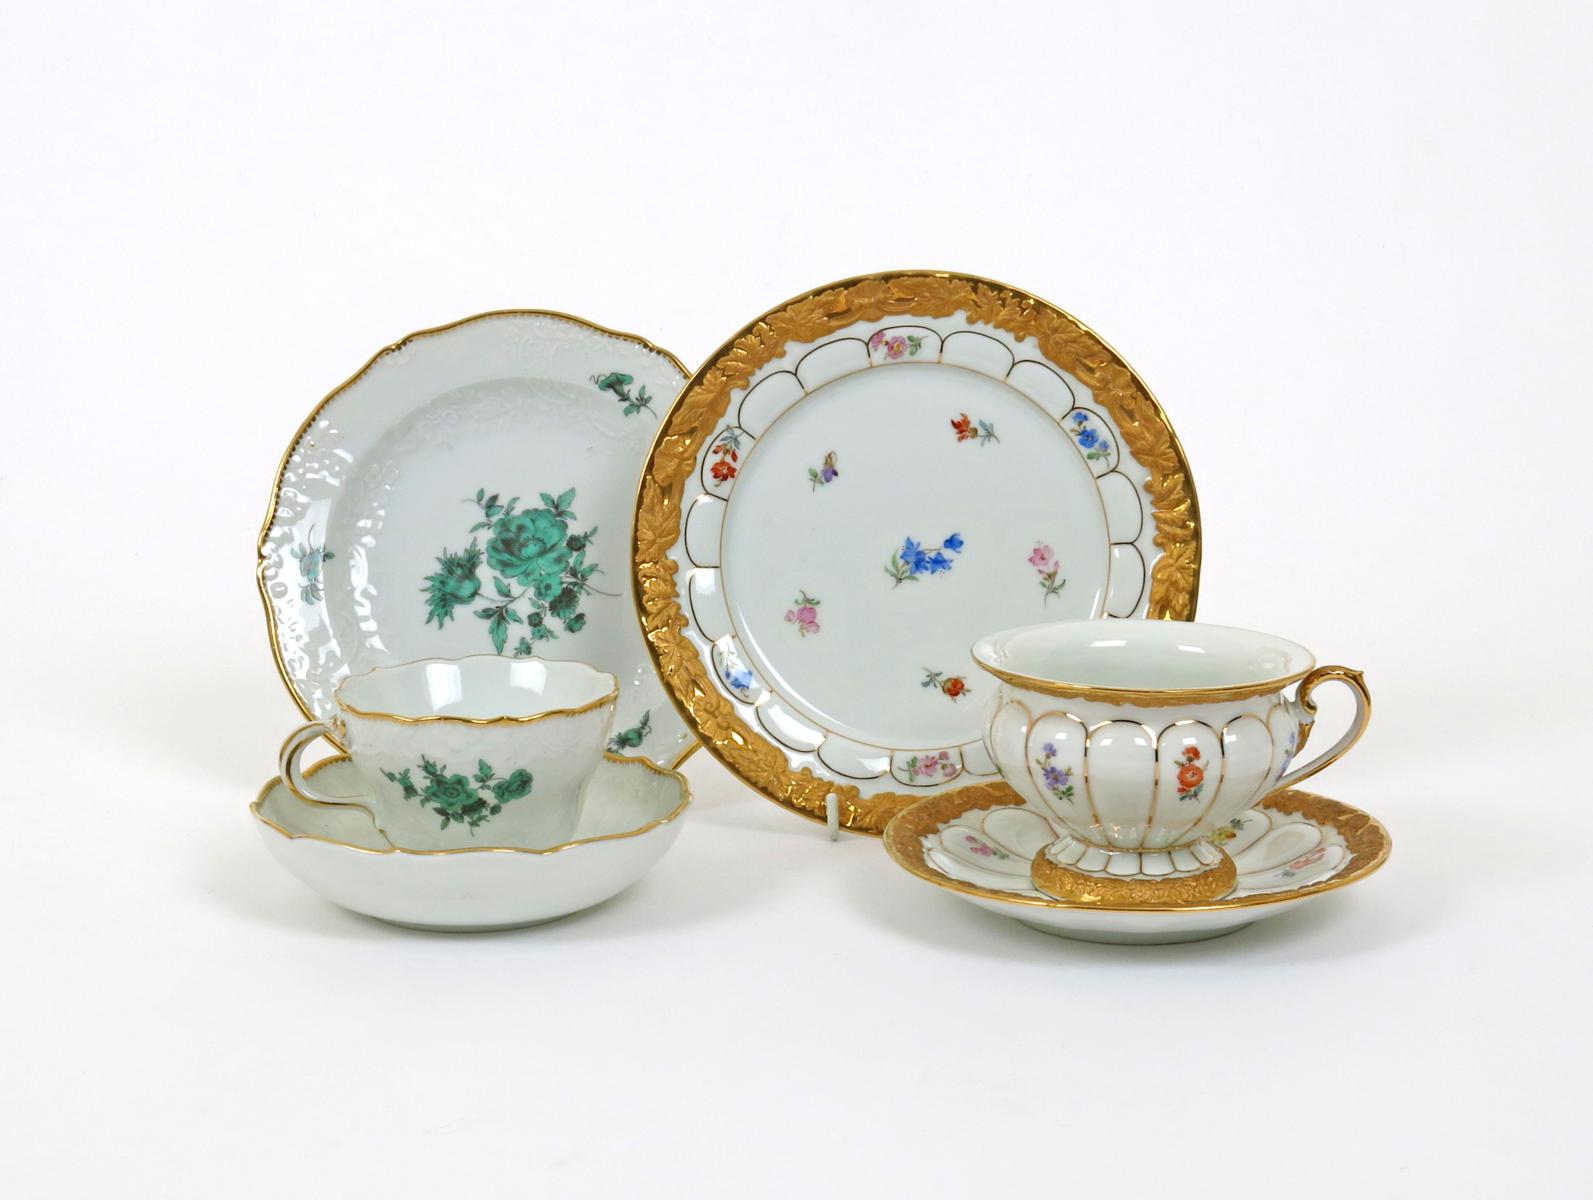 Two Meissen cups and saucers with matching plates  20th century, one moulded with arched panels and